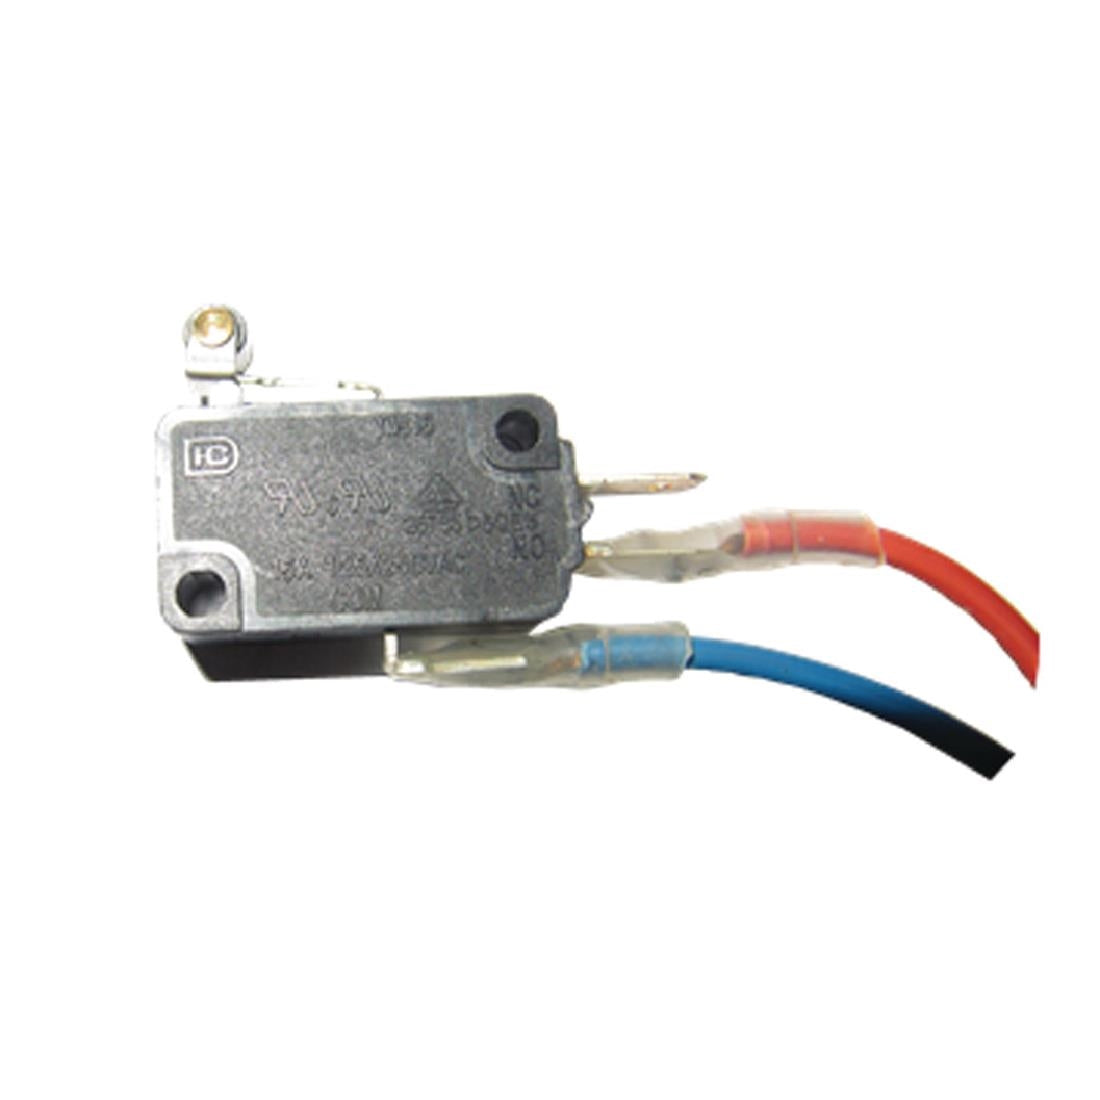 Buffalo Microswitch AD448 JD Catering Equipment Solutions Ltd